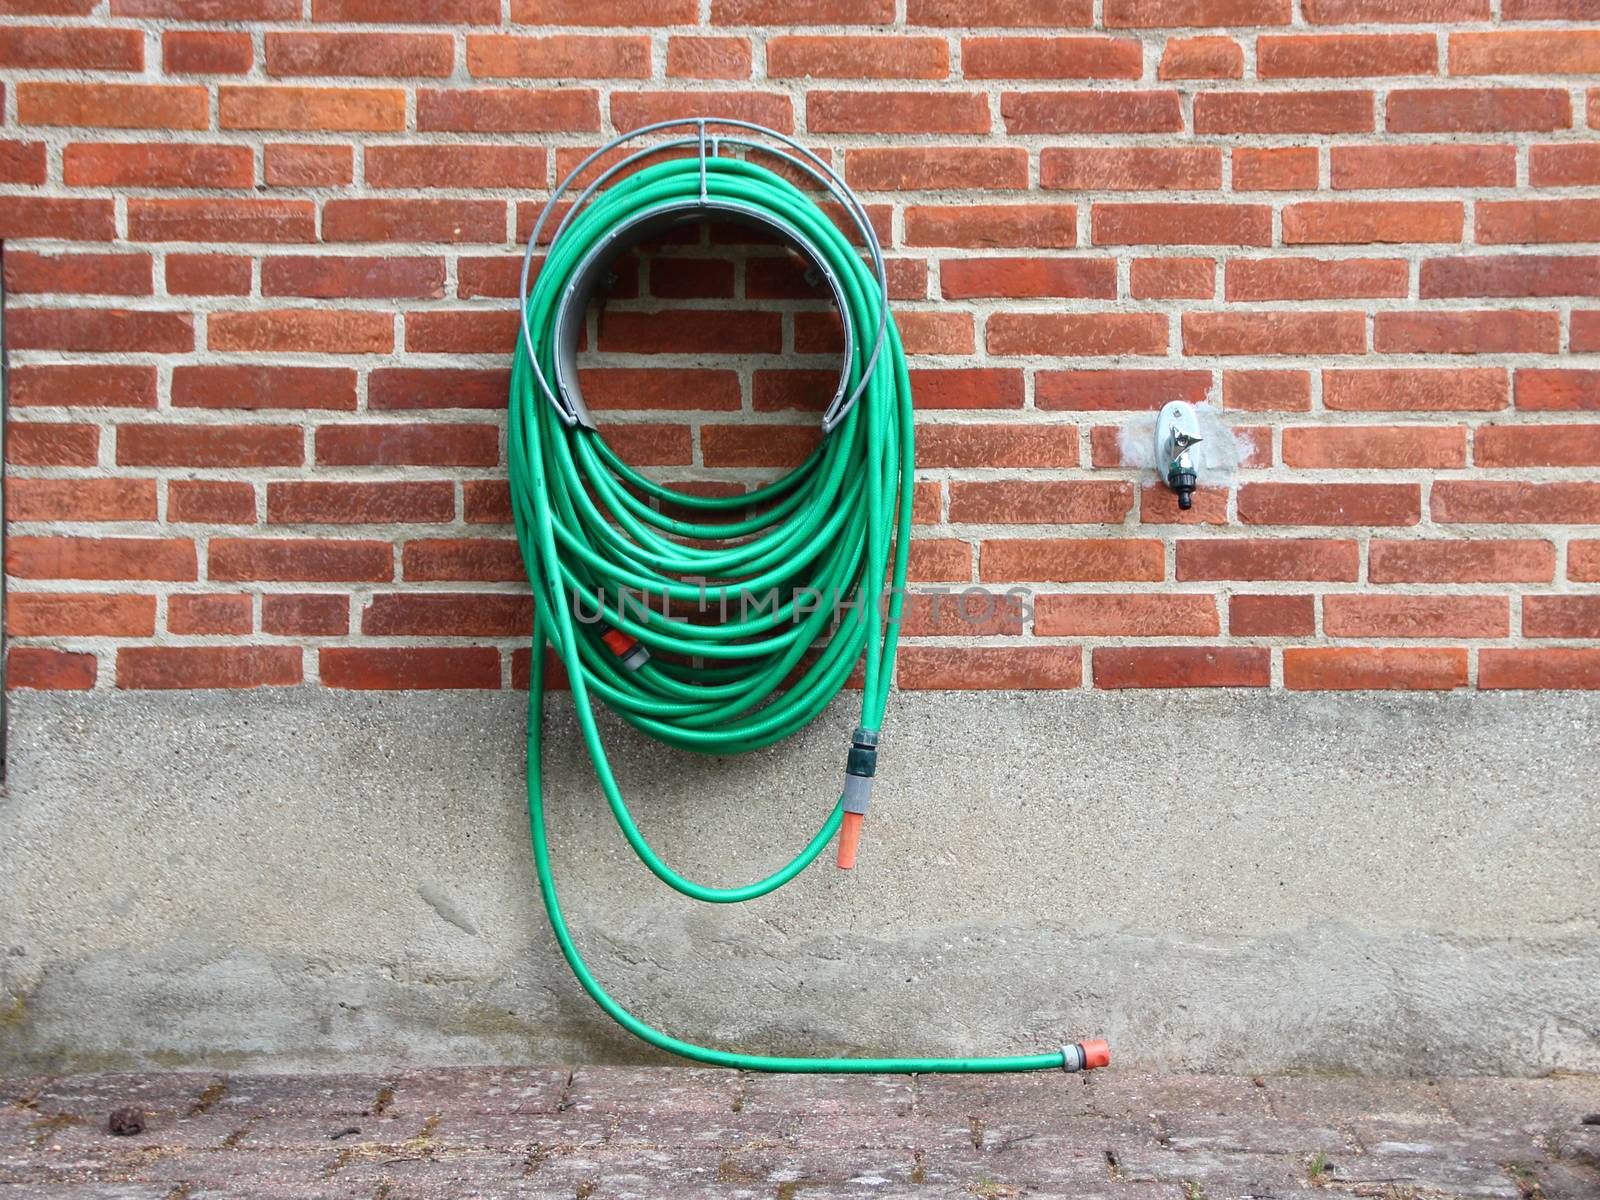 Green Garden Water Hose mounted on Red Brickwall by HoleInTheBox